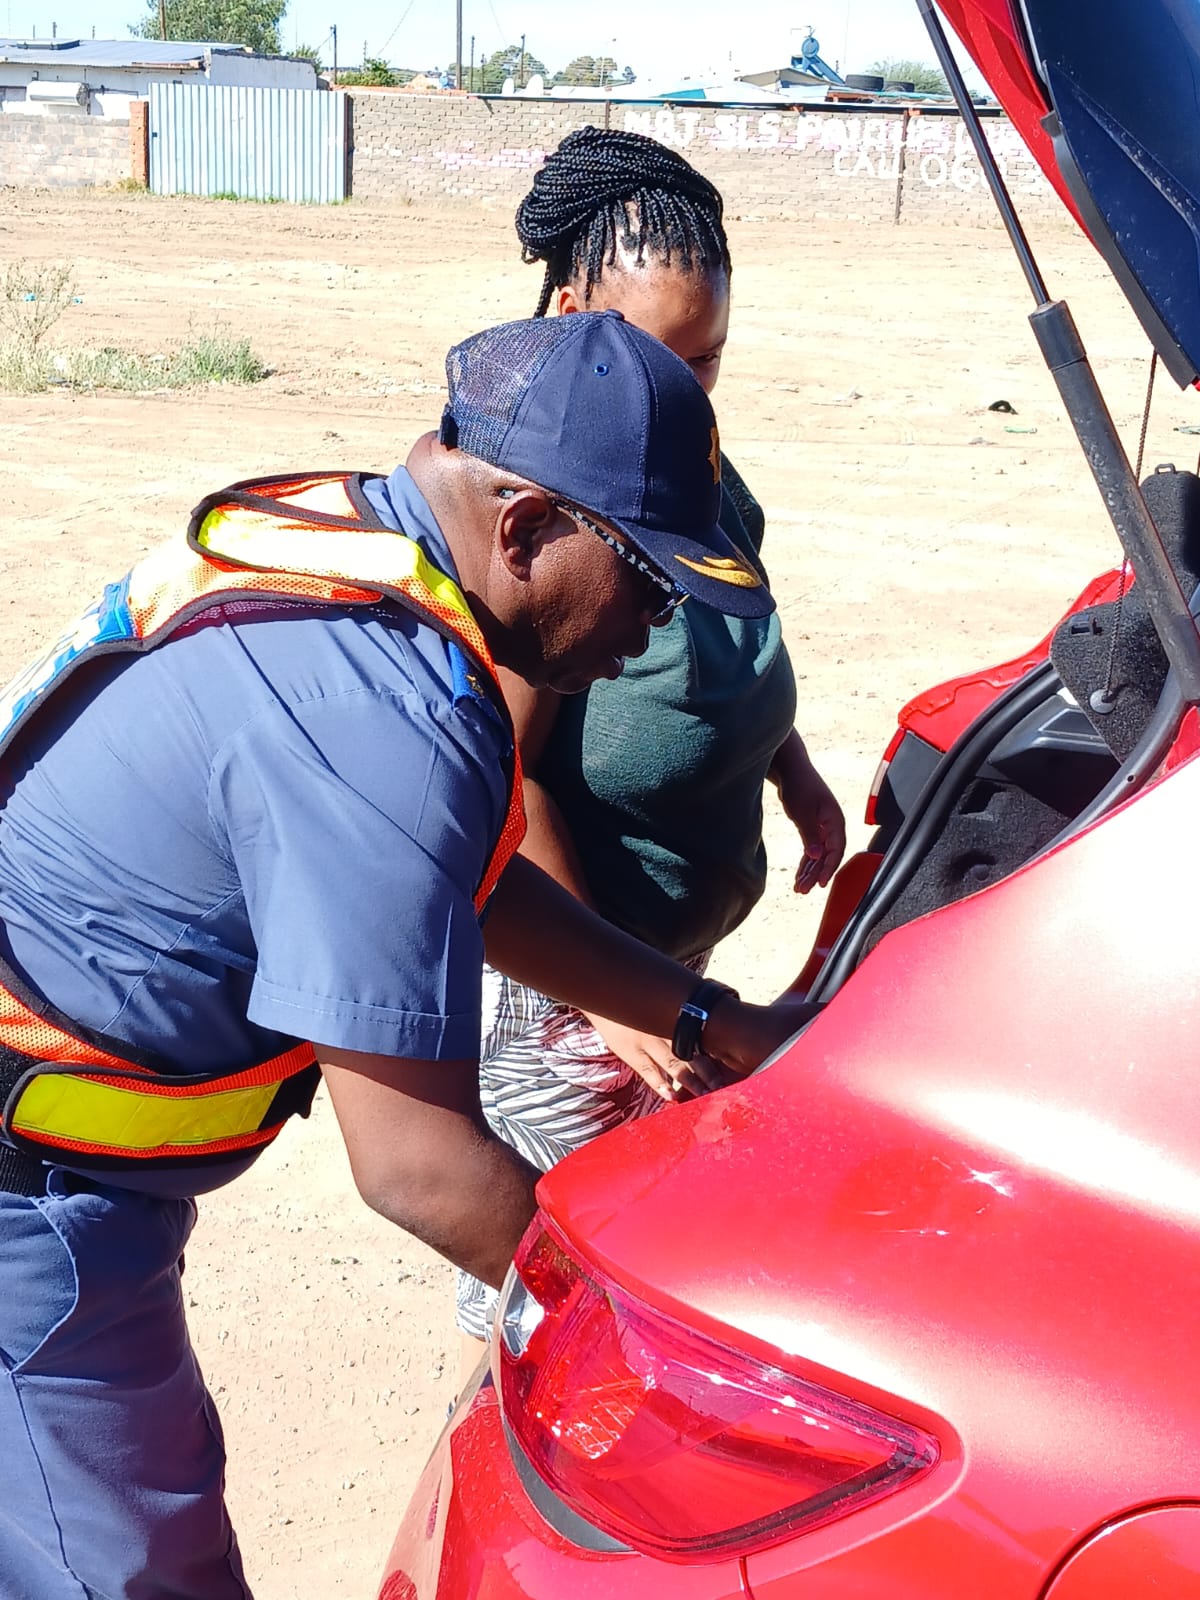 Northern Cape Police arrest over 1000 suspects through Operation Shanela